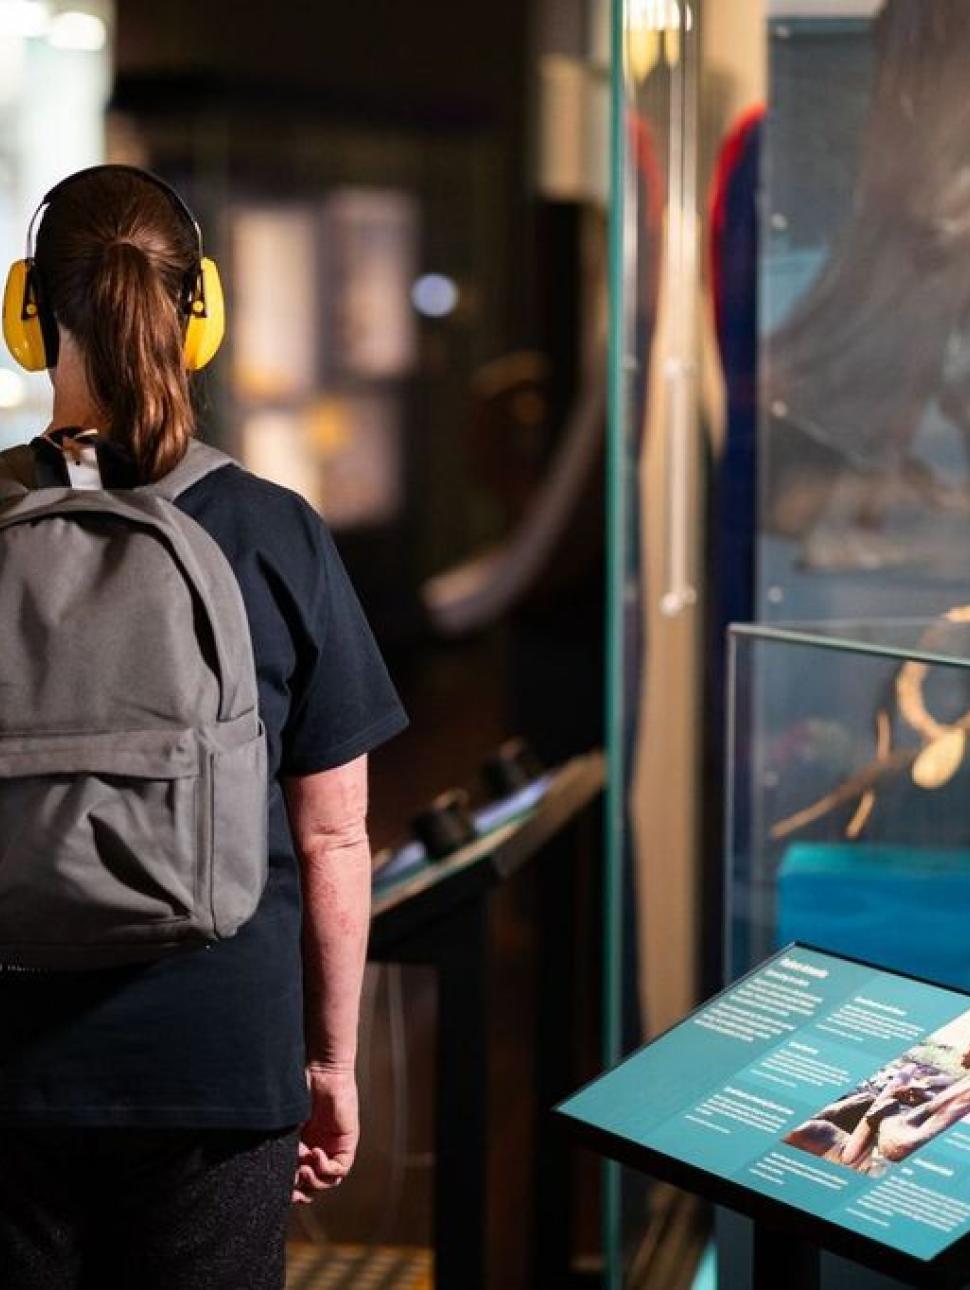 A woman wearing headphones examines a display of artifacts, immersing herself in the rich history they represent.